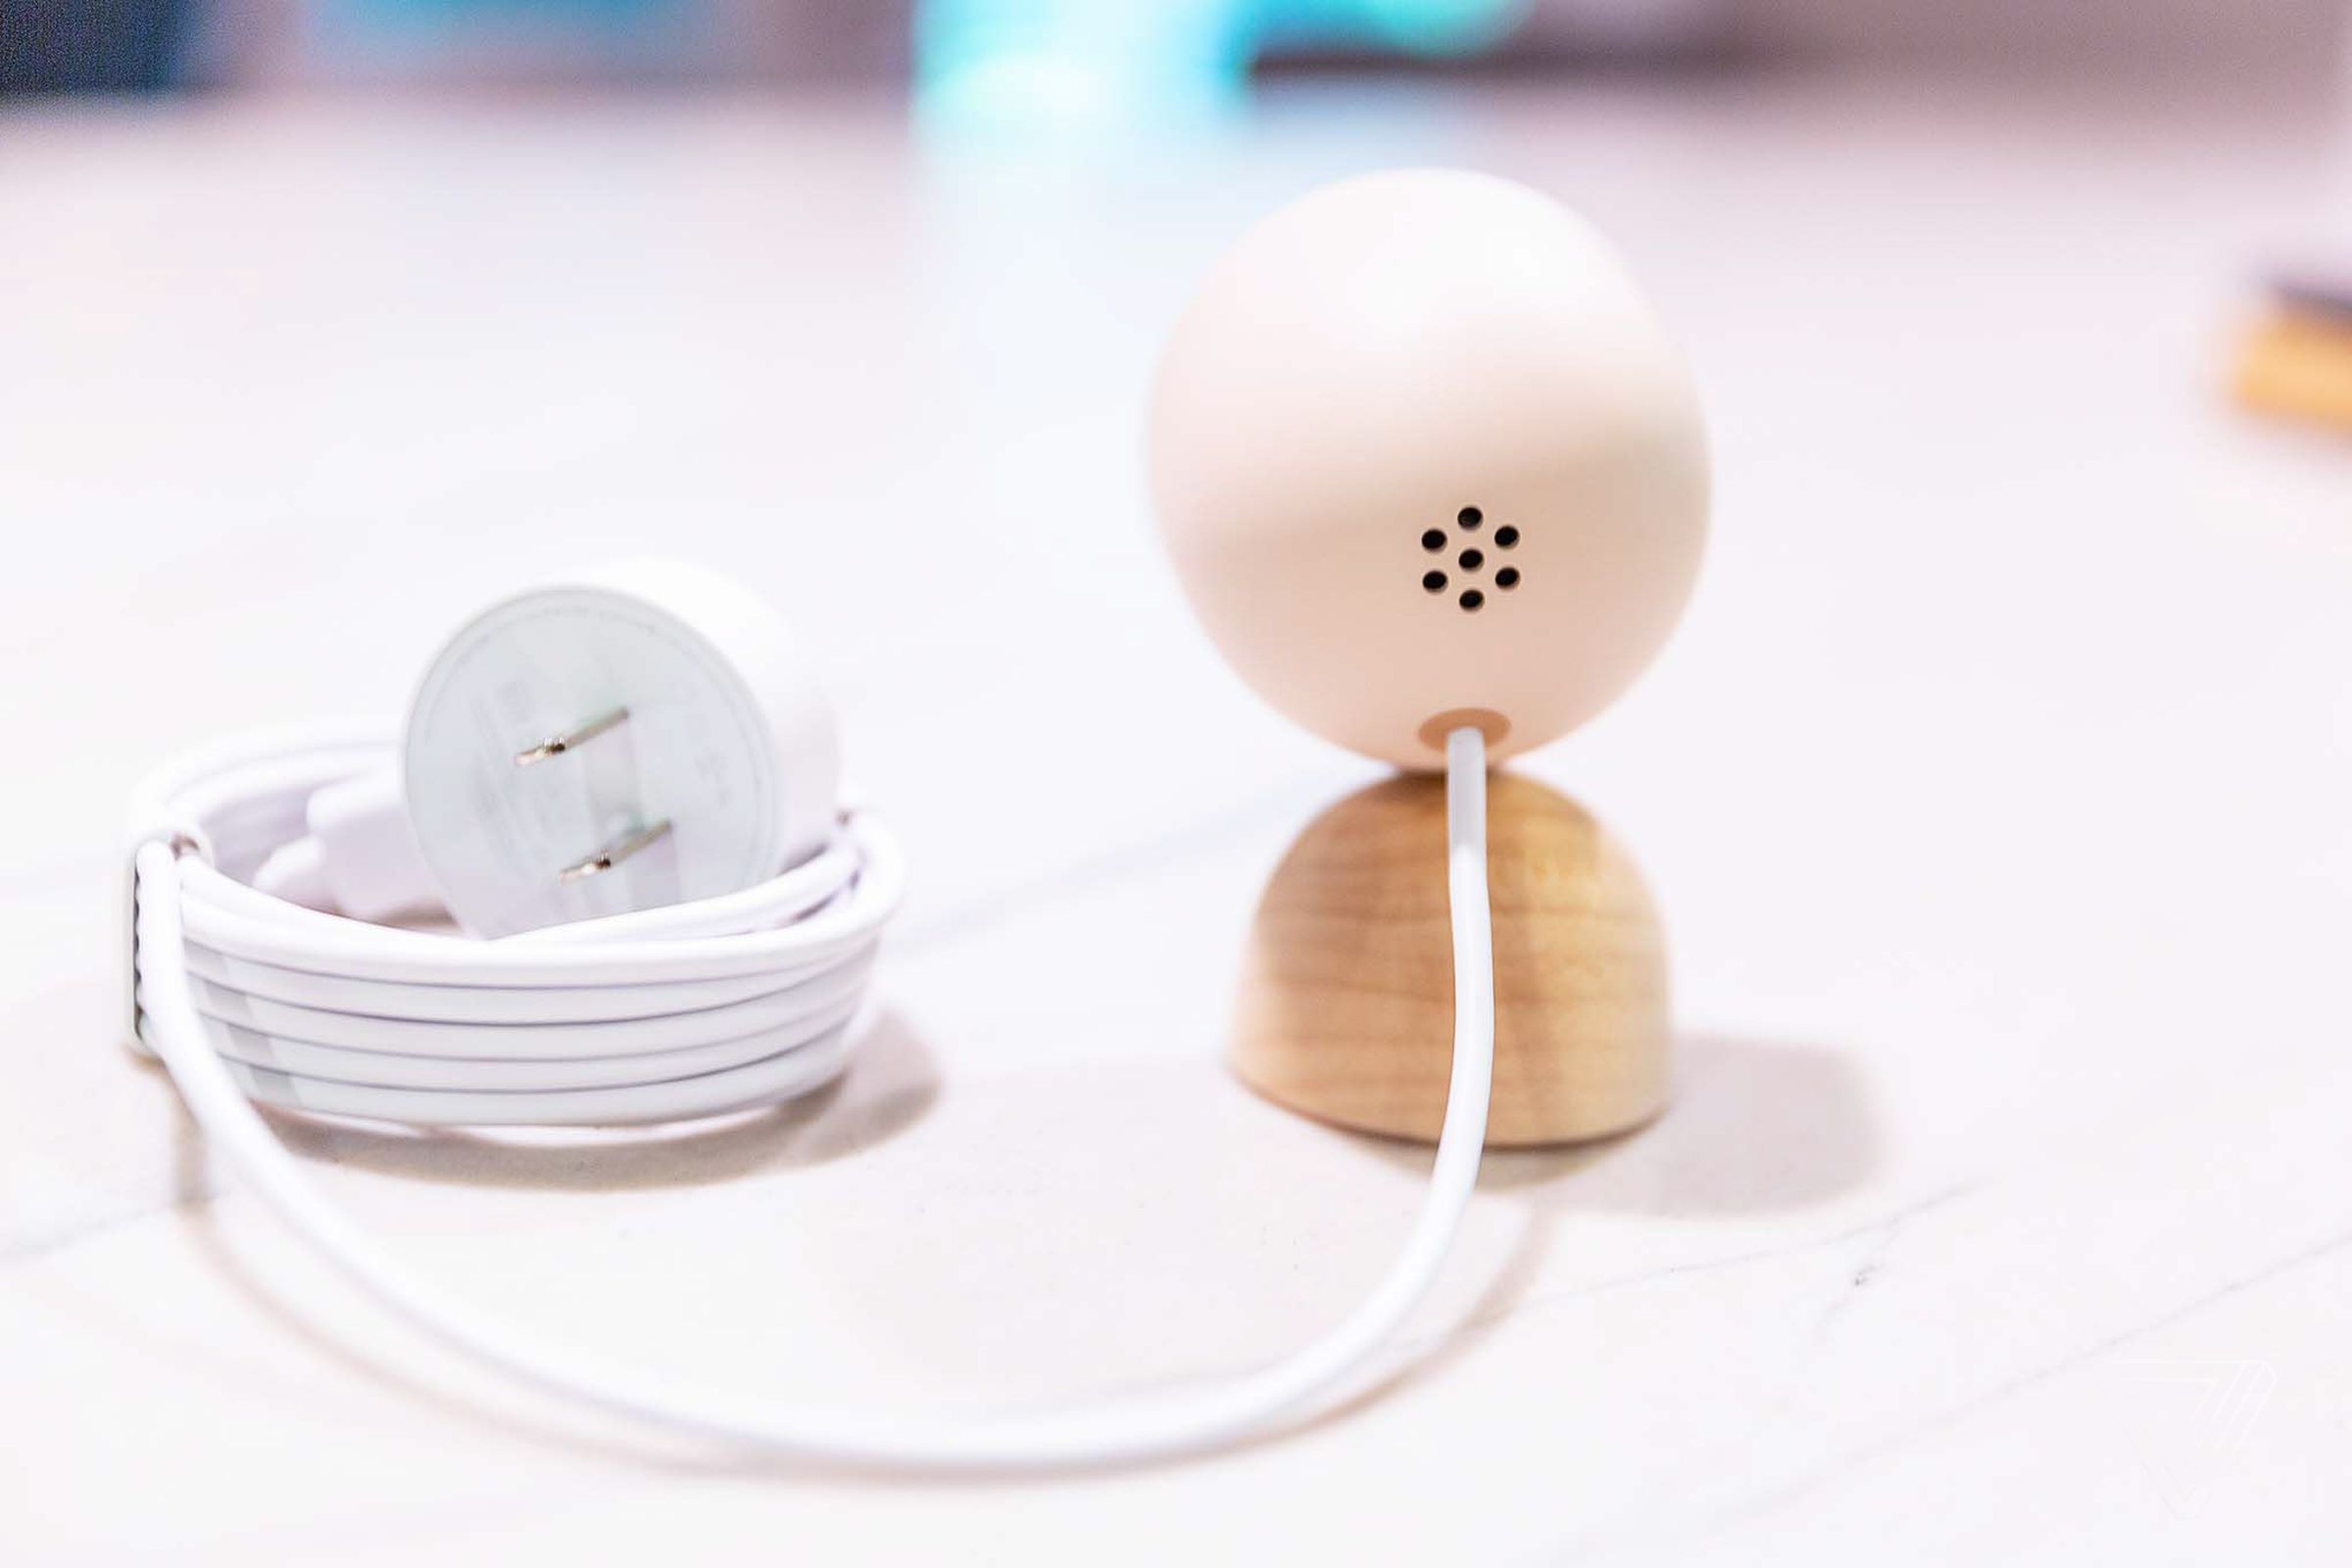 The Nest Cam uses an attached 10 foot USB-A power cable, which can plug into the included power brick.  